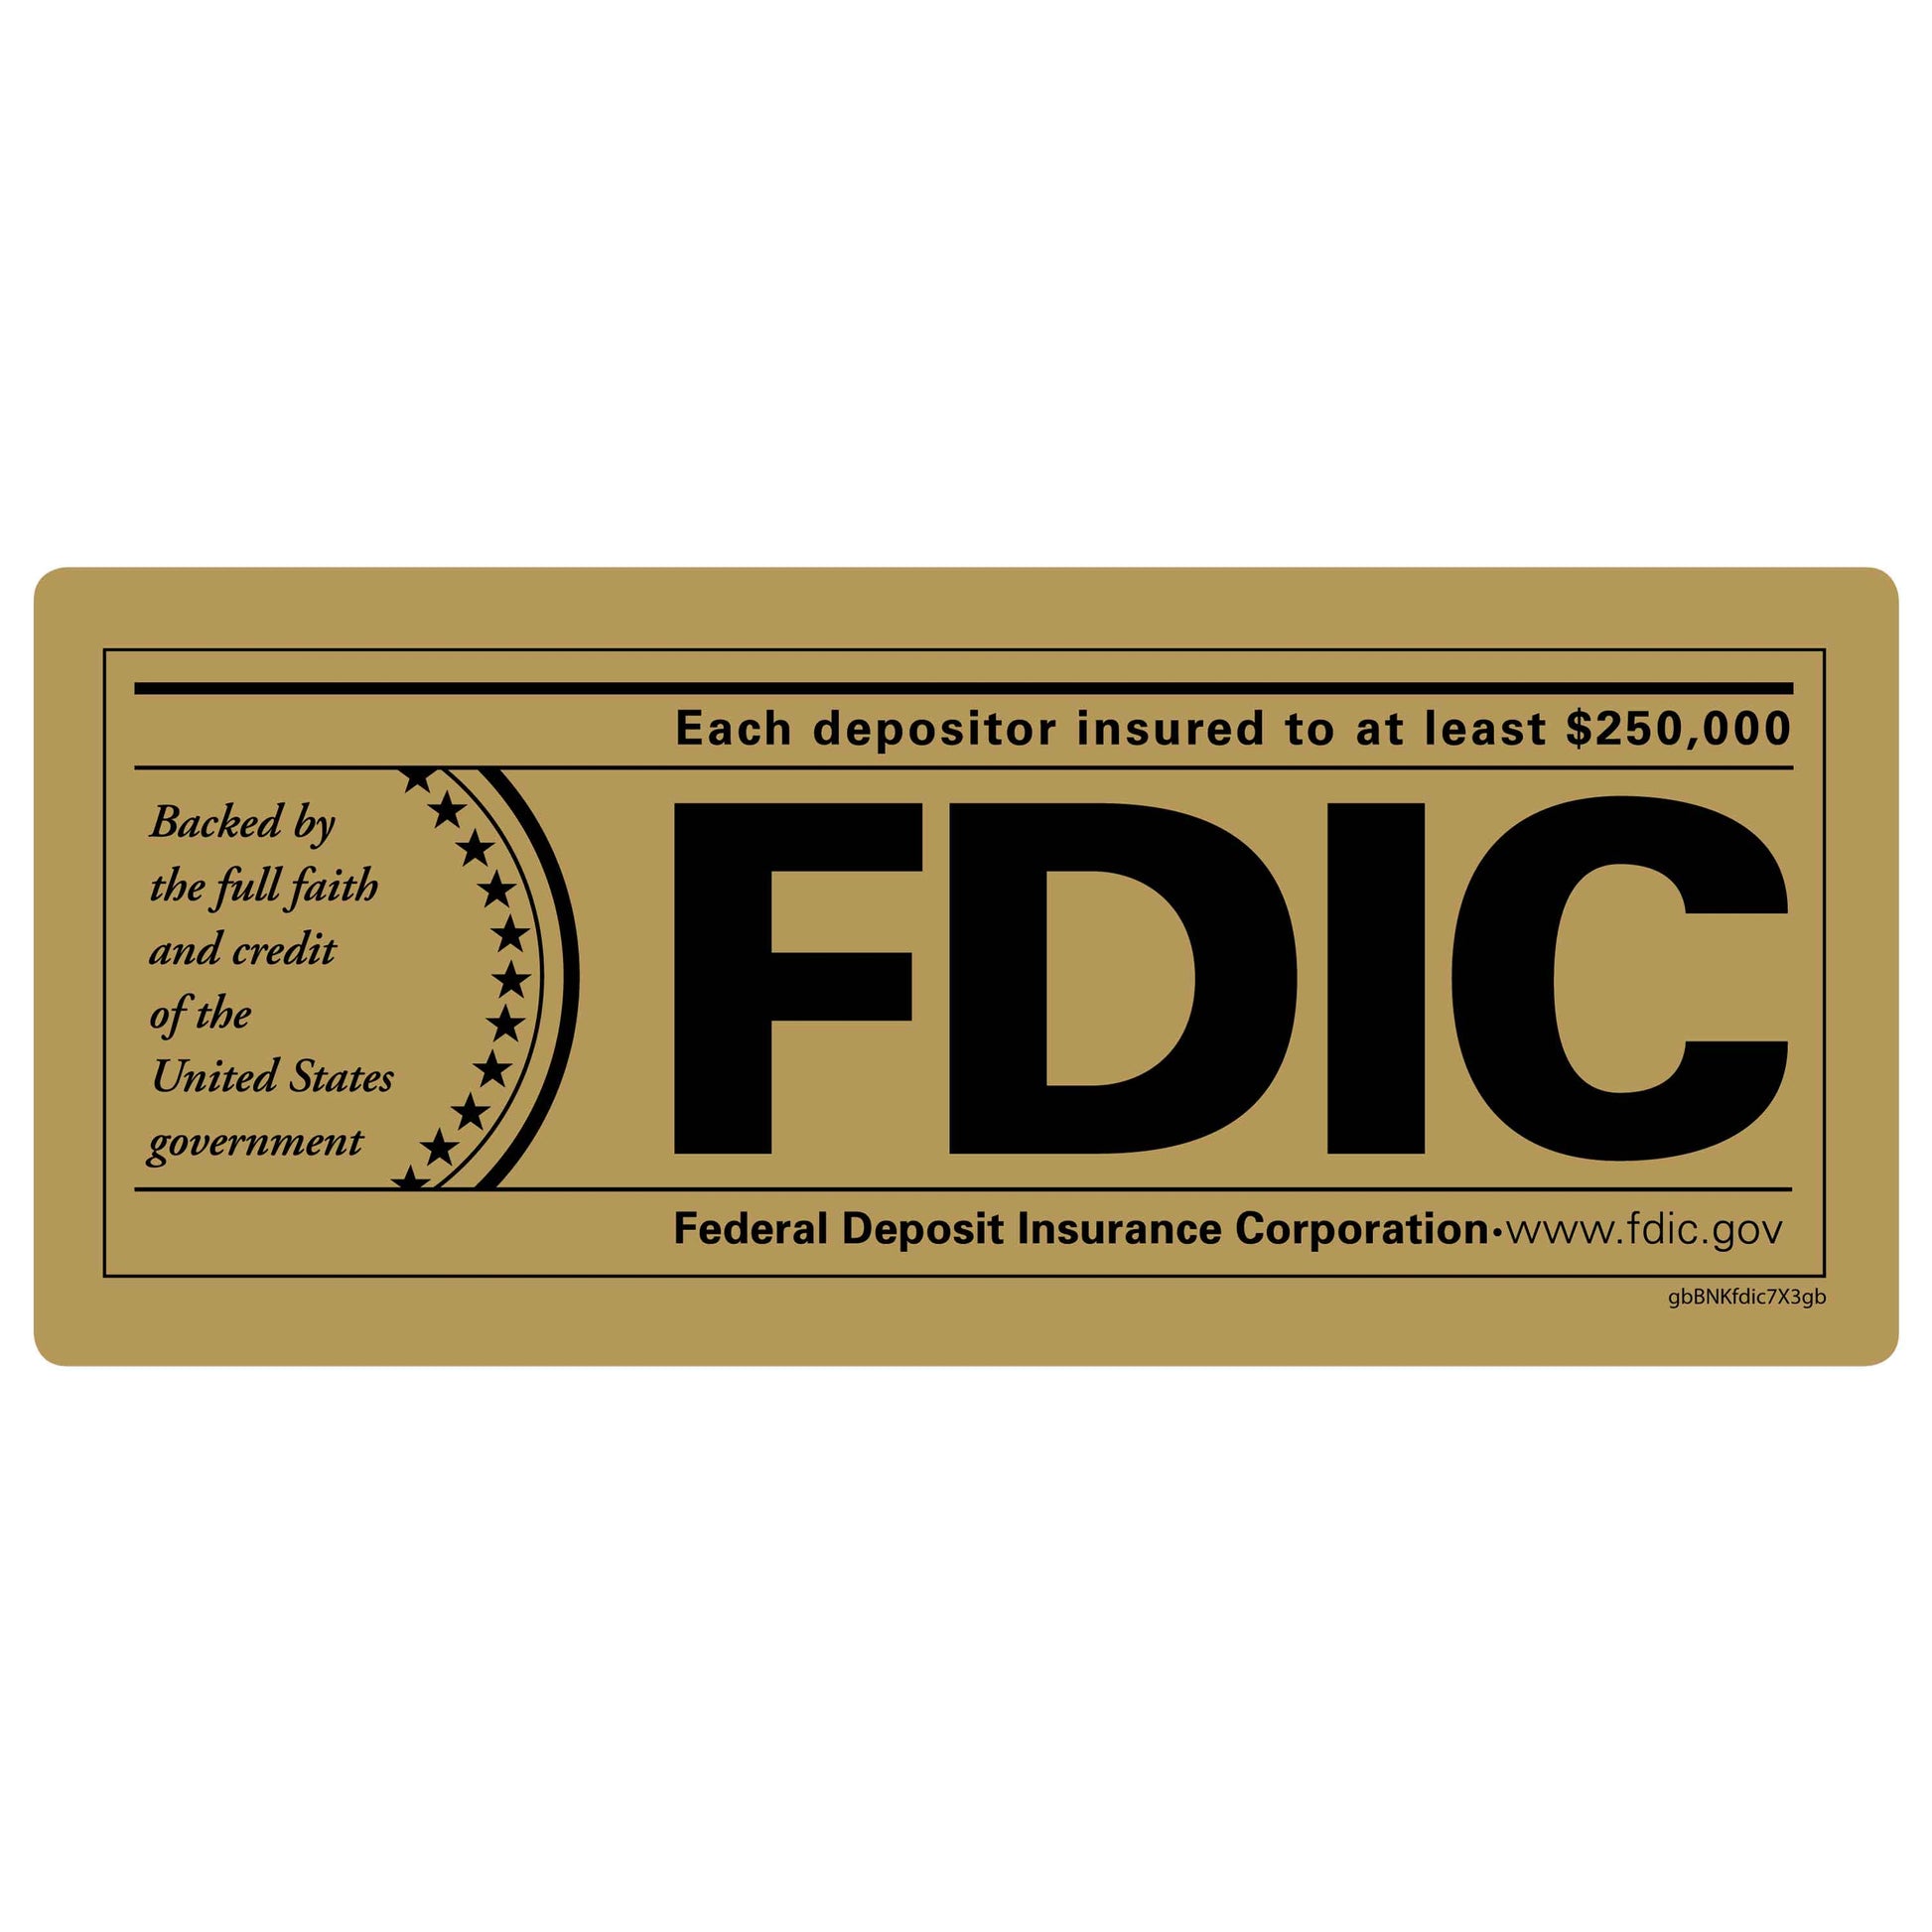 FDIC Gold and Black Decal. 7 inches by 3 inches in size.